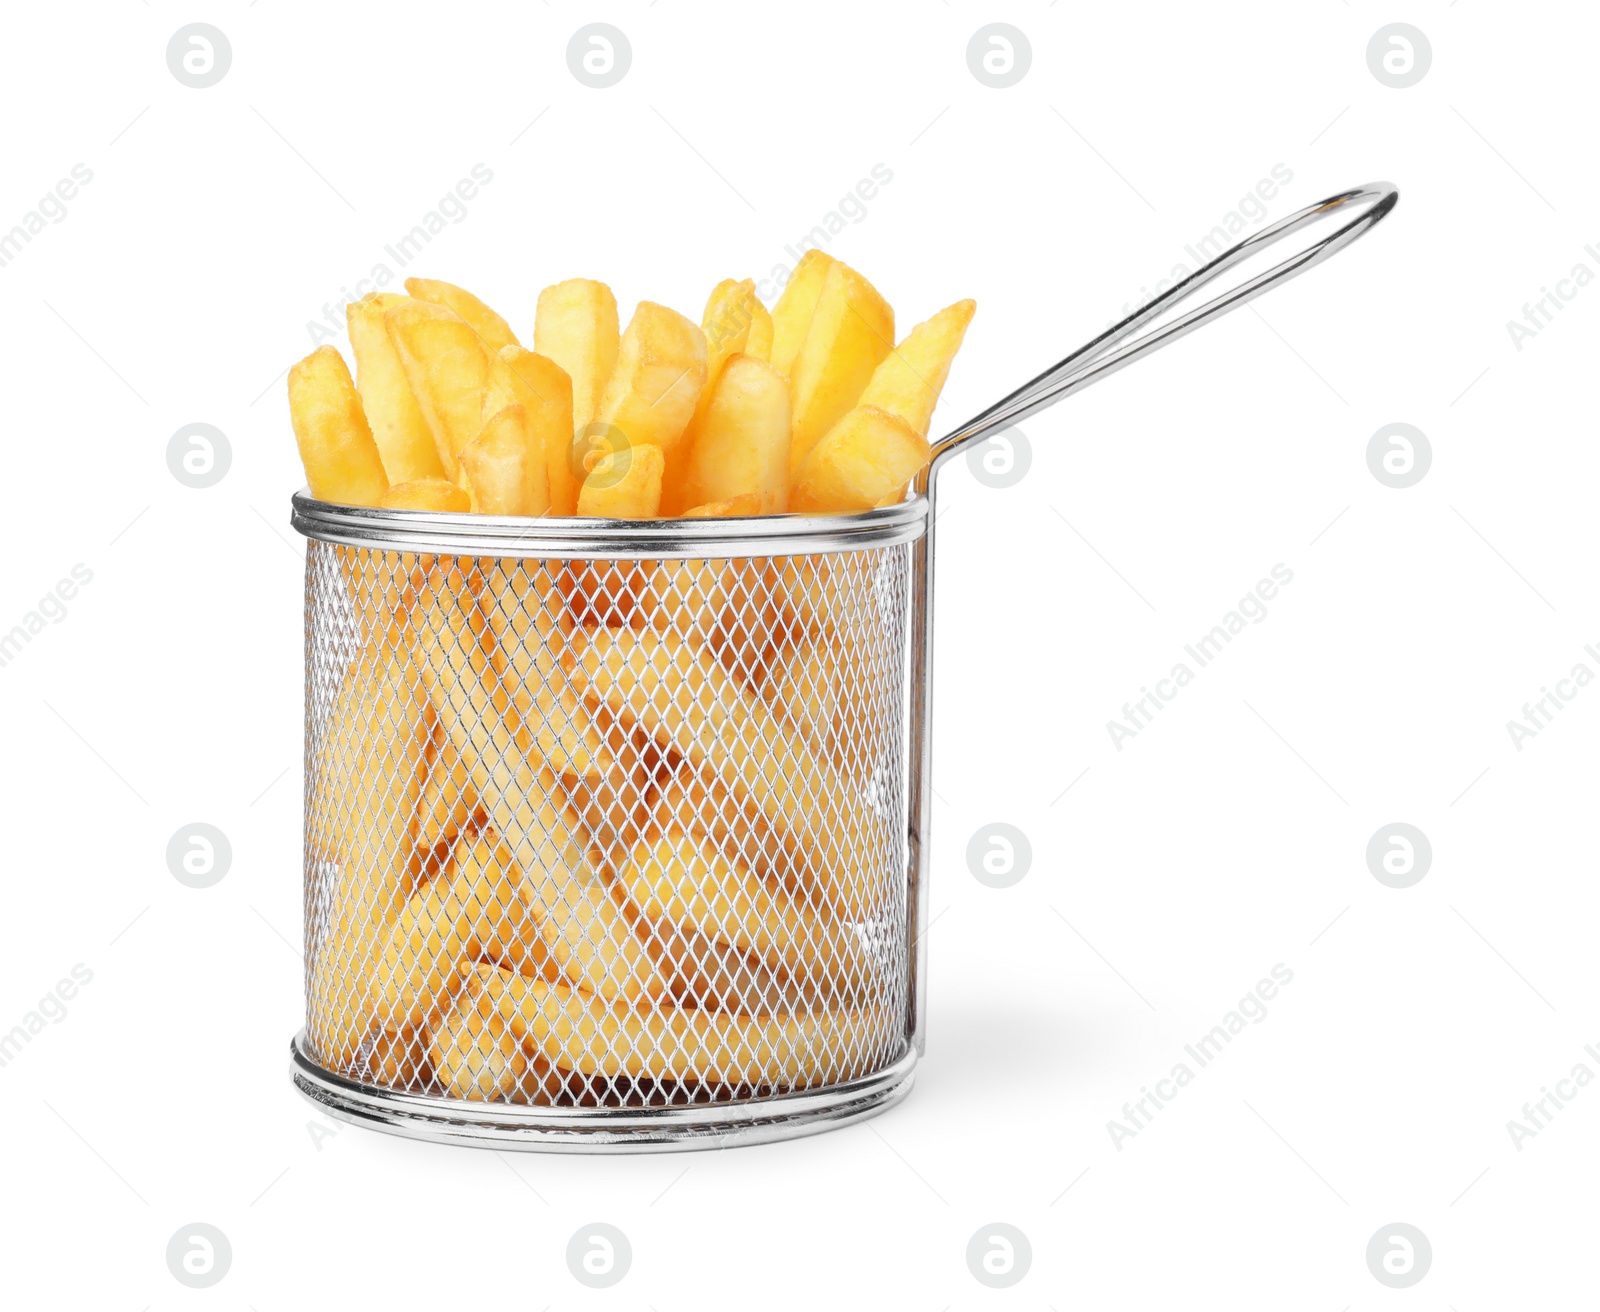 Photo of Tasty French fries in metal basket isolated on white